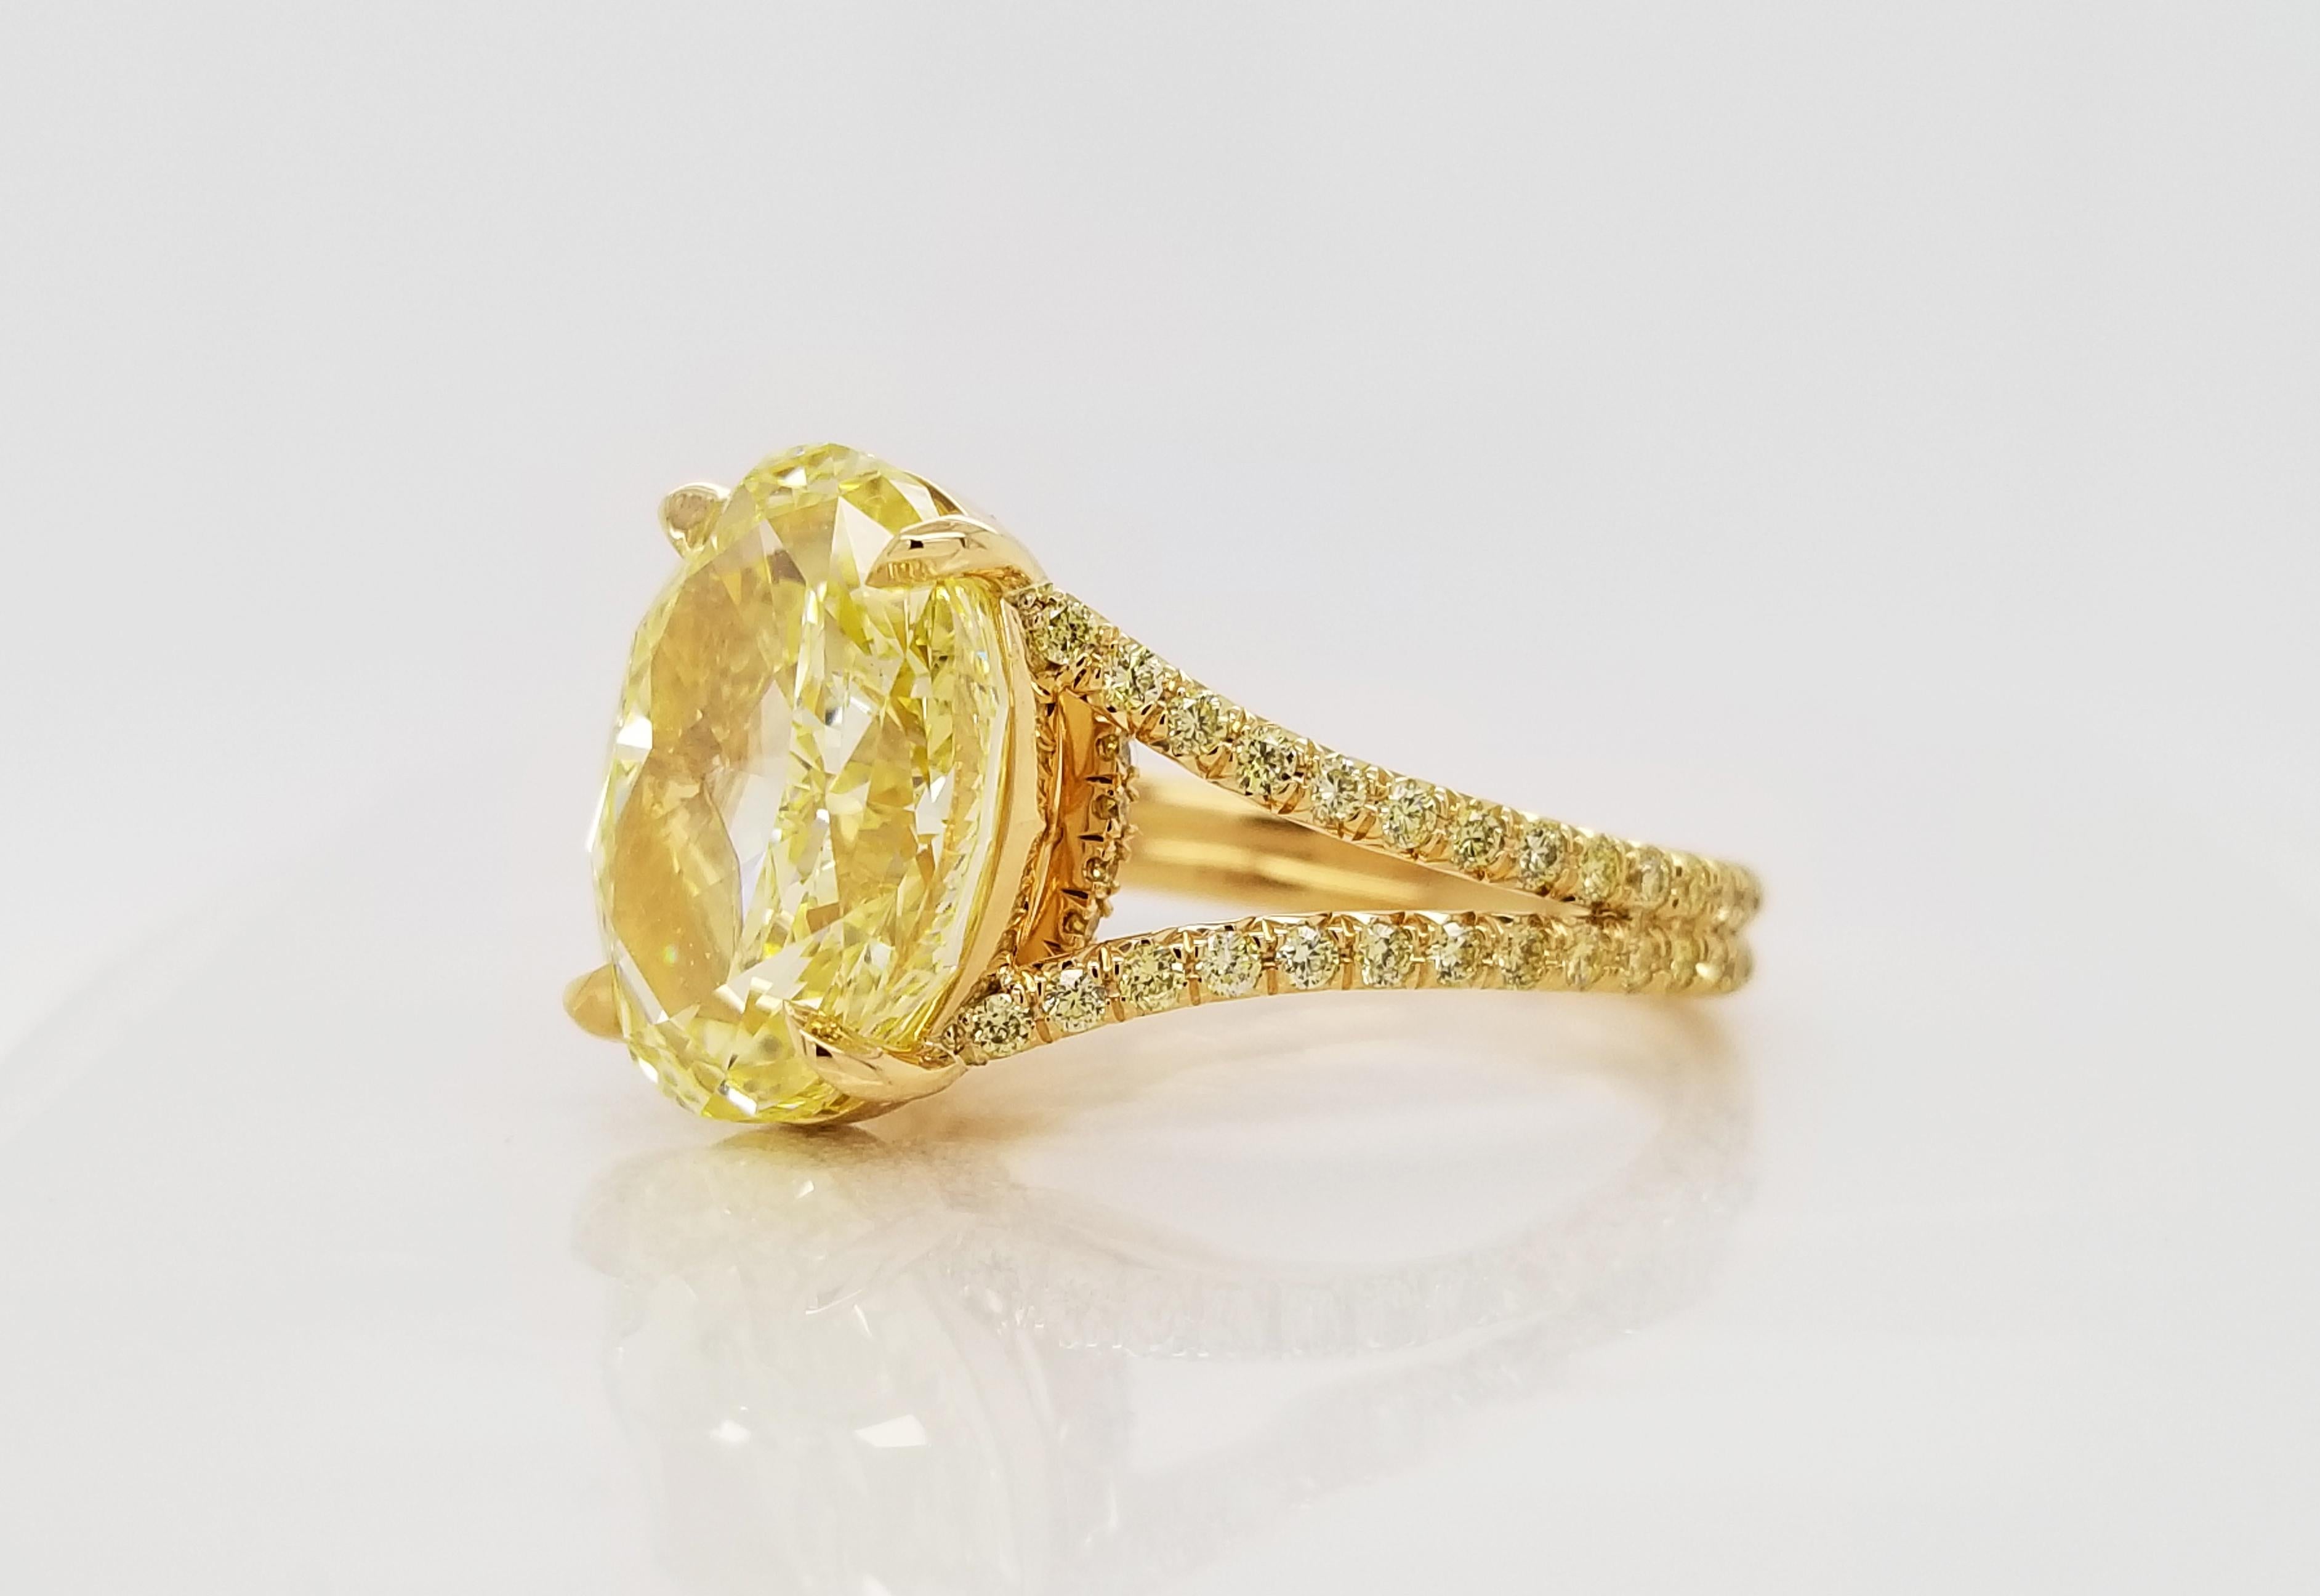 From SCARSELLI, a simply important ring featuring a 6.00 carats Fancy Intense Yellow Oval cut diamond (GIA VS2 Clarity Certificate 5202490787) surrounded by 0.48 carats of Fancy Intense Yellow Round brilliant diamonds in a coordinating handmade